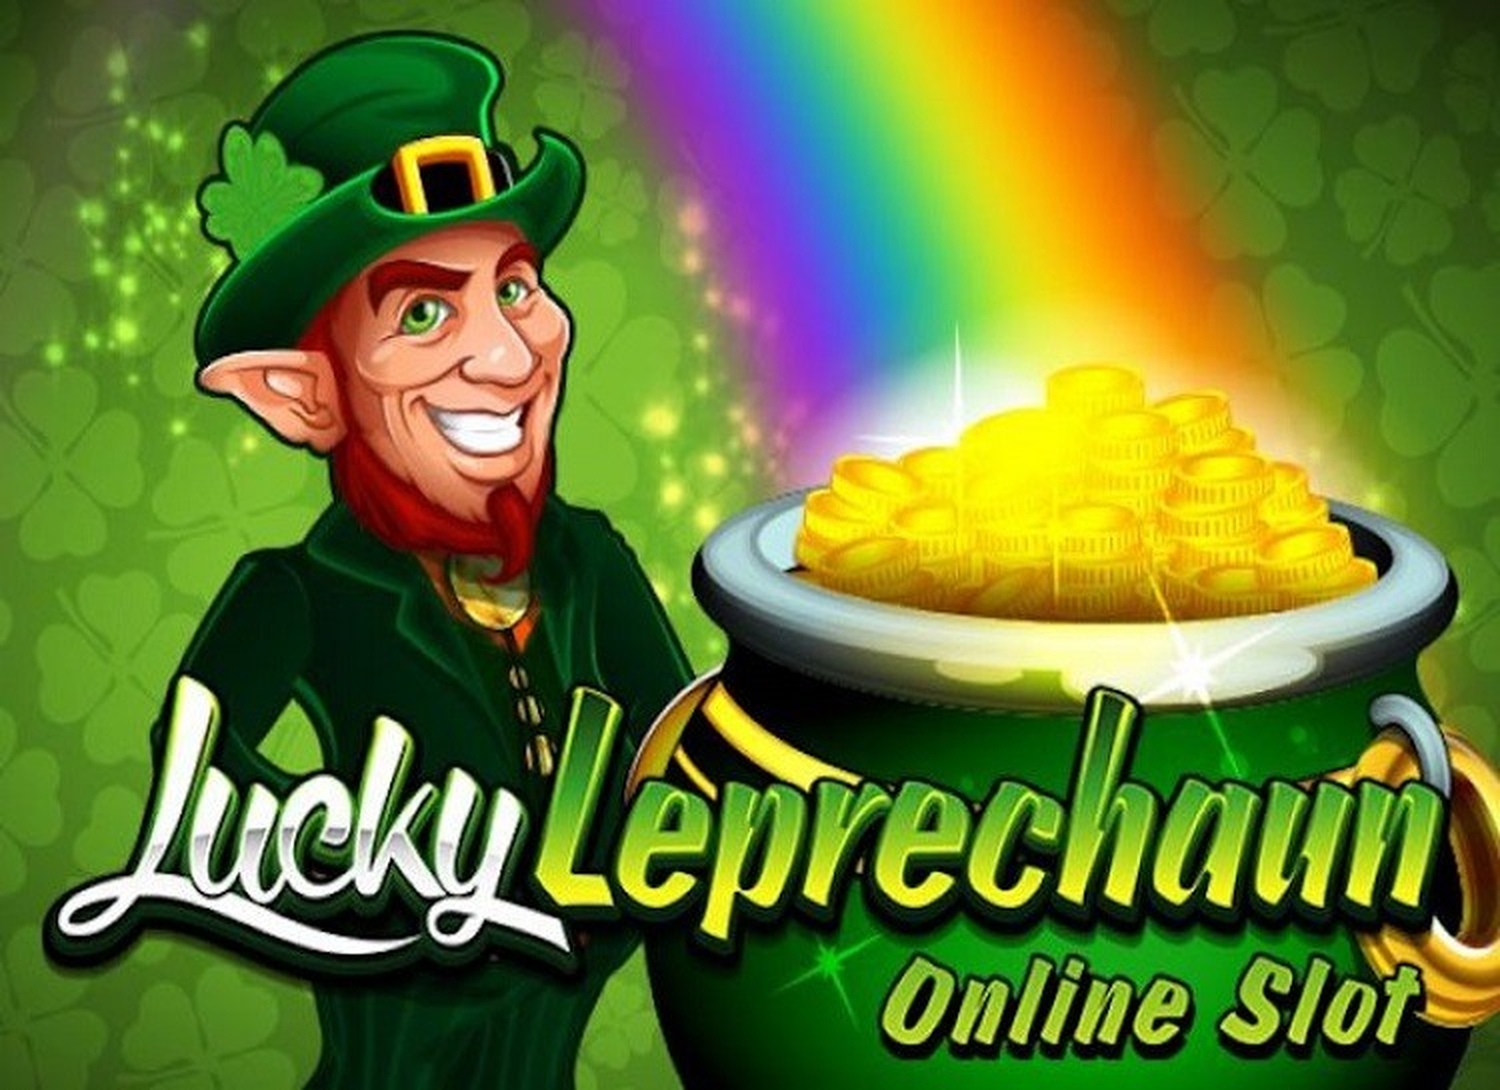 The Lucky Leprechauns Online Slot Demo Game by Genii